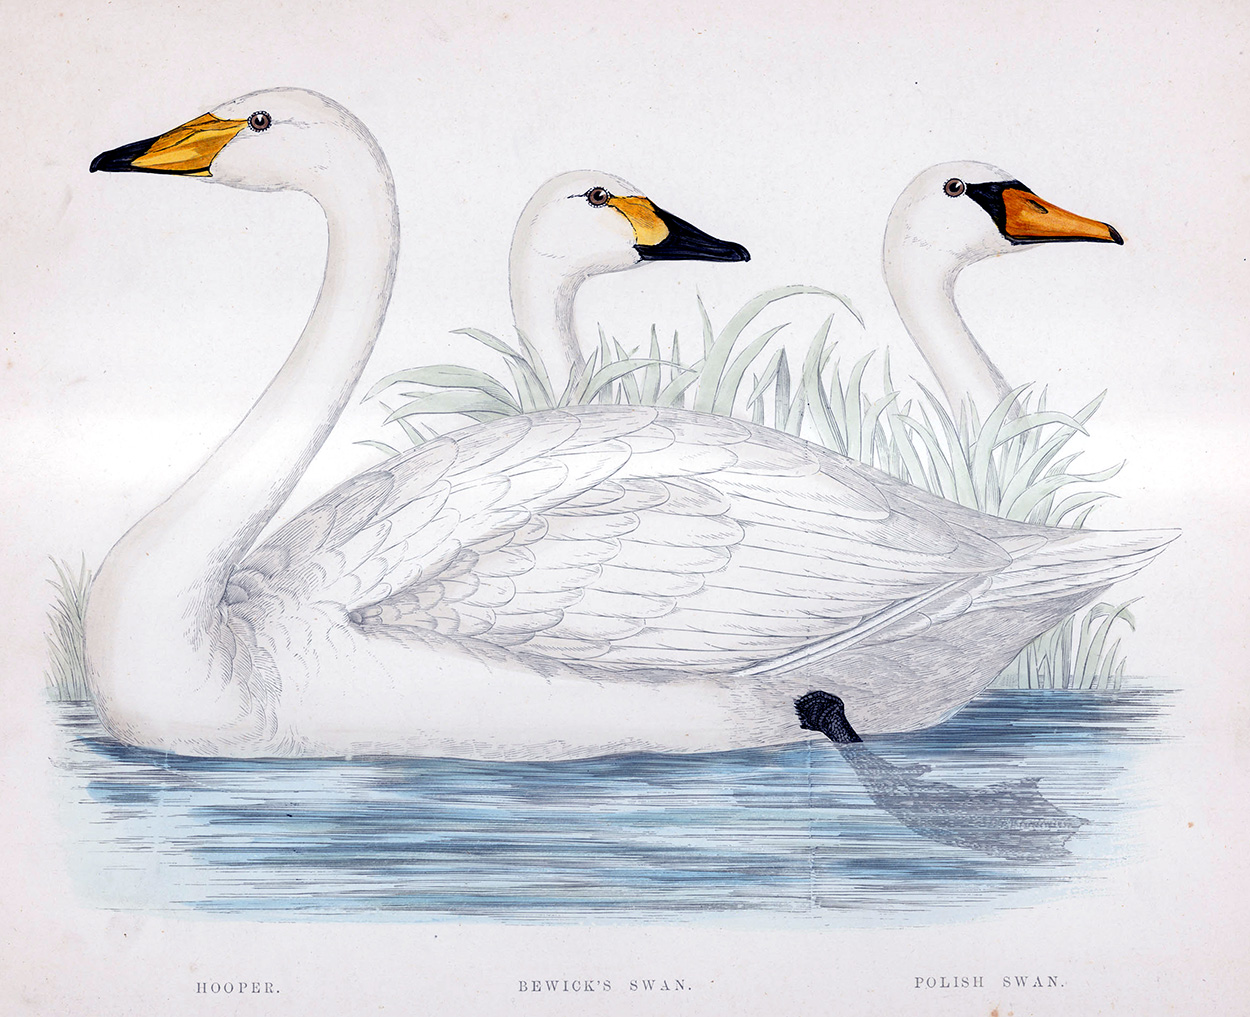 Bewick's Swan - hand coloured lithograph 1891 (Print) art by Beverley R Morris at The Illustration Art Gallery